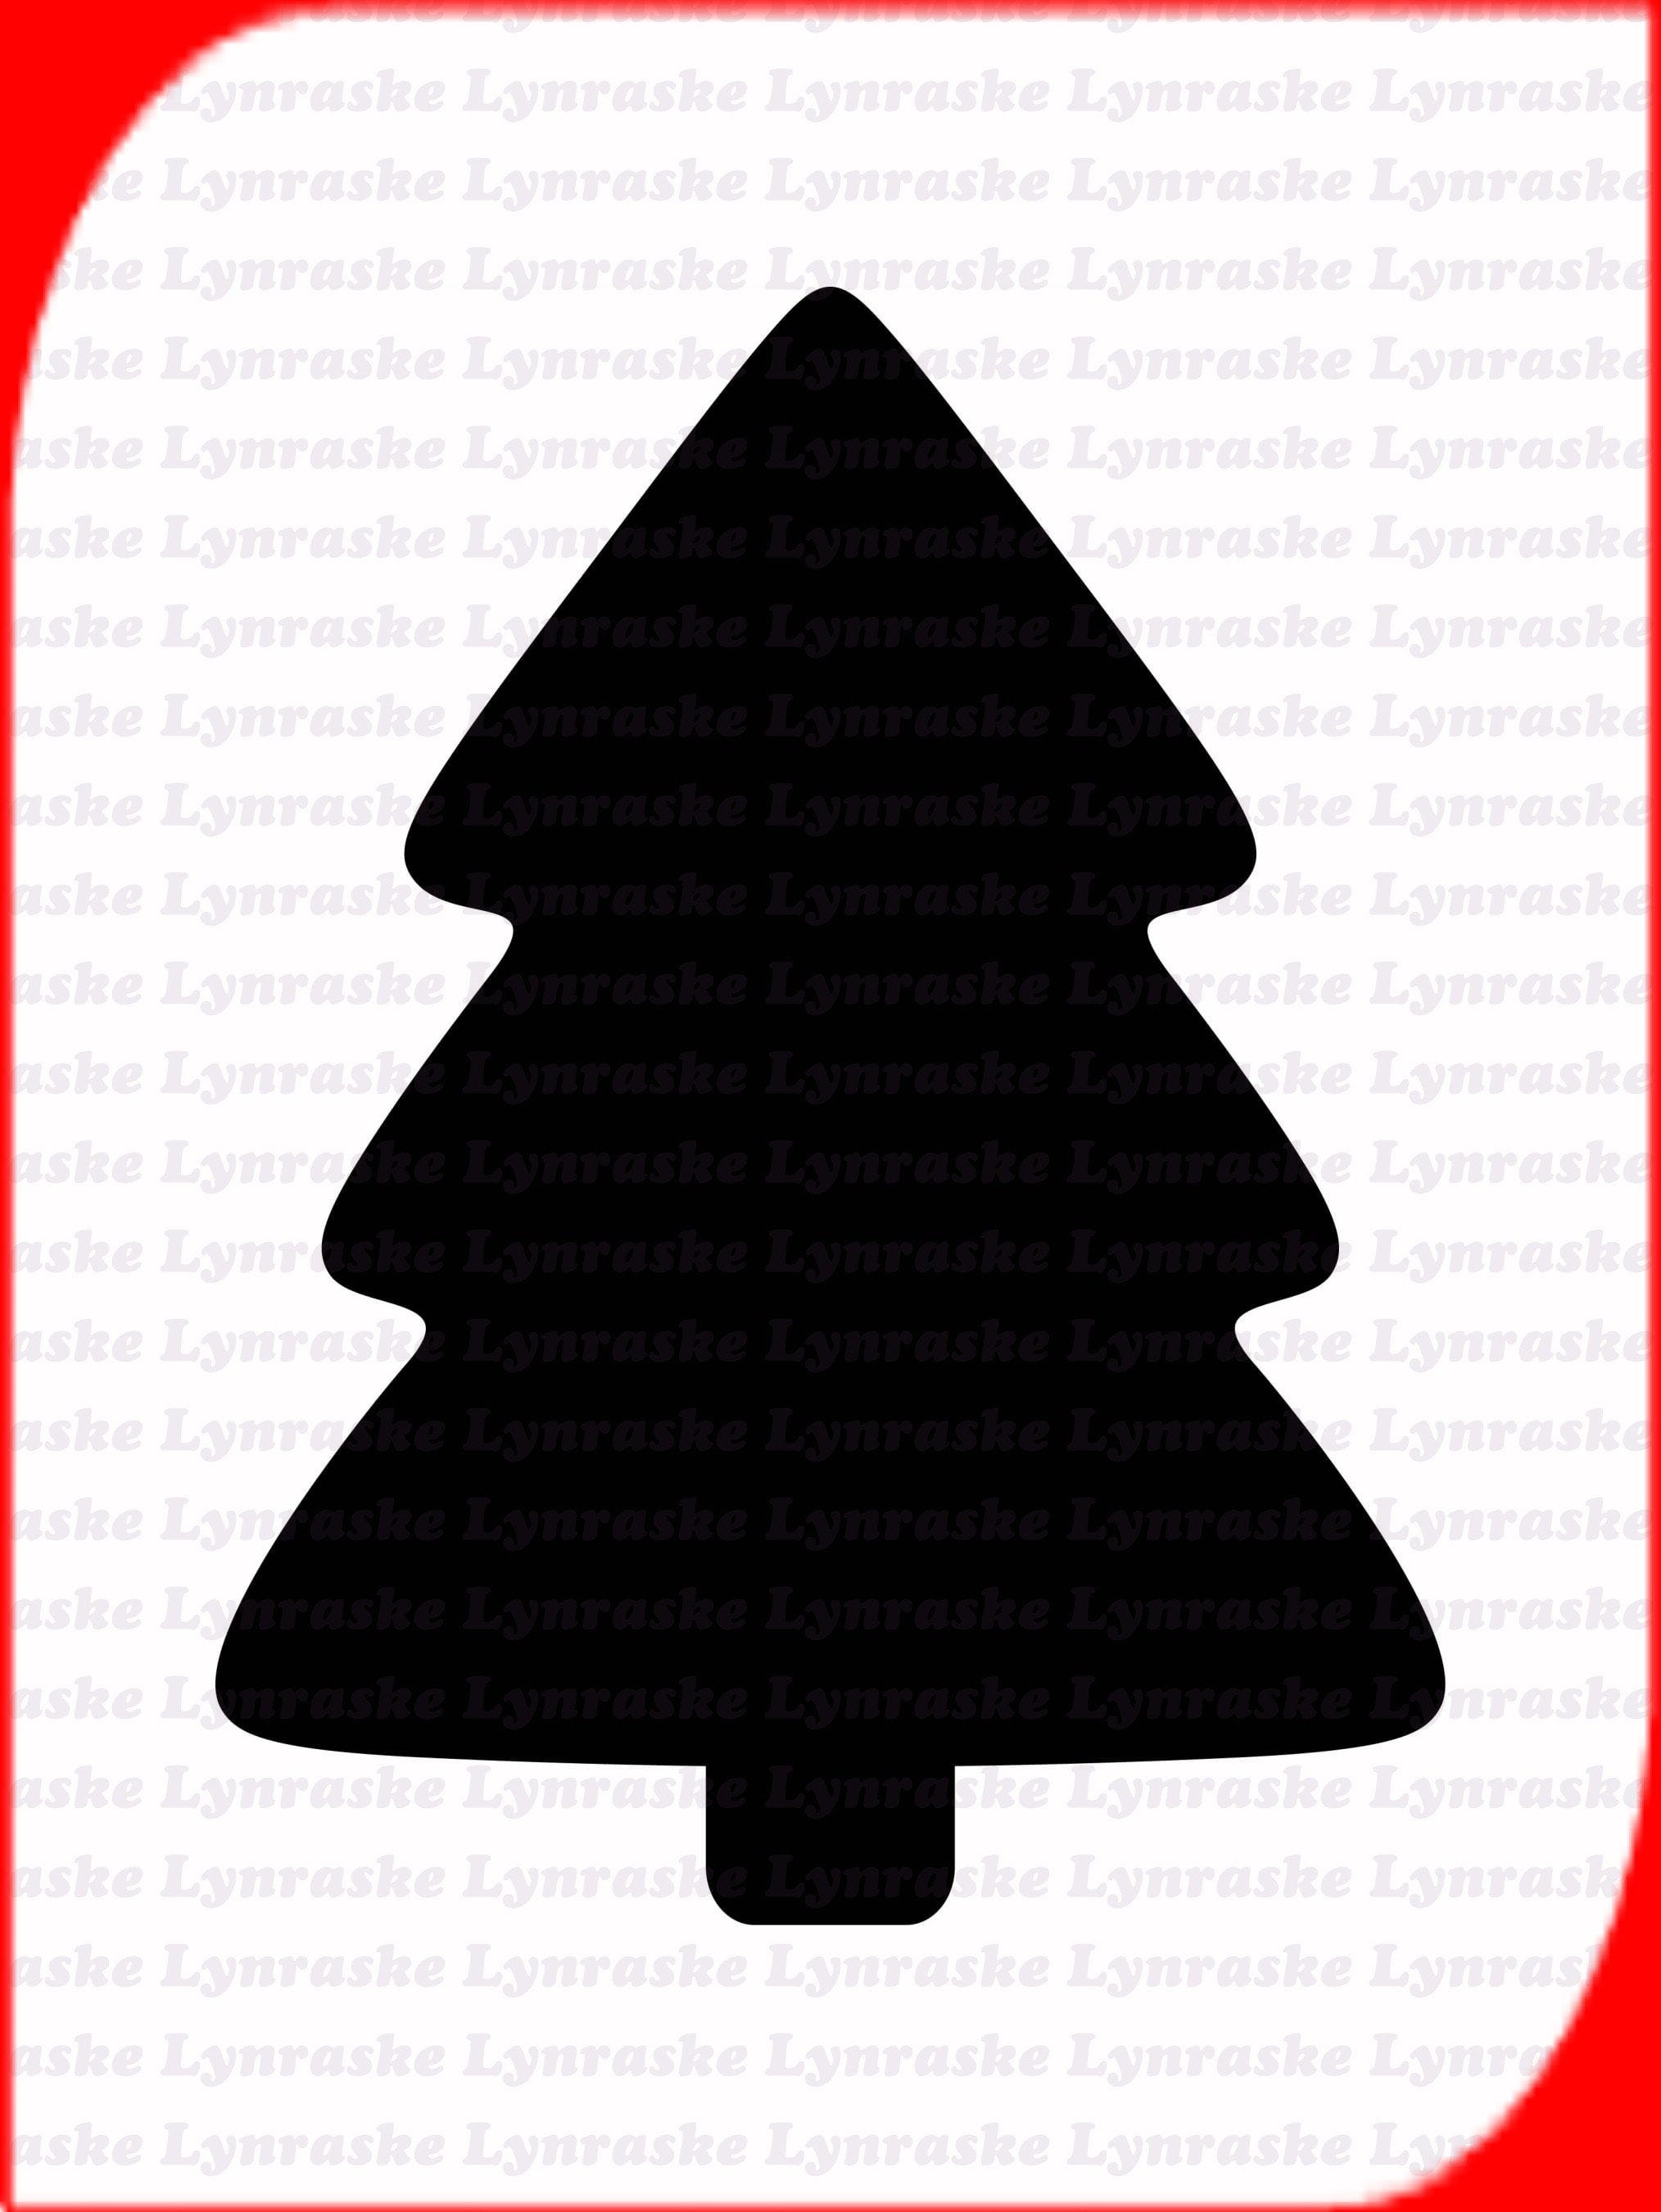 Simple Christmas Tree Silhouette SVG, svg, dxf, Cricut, Silhouette Cut File, Instant Download